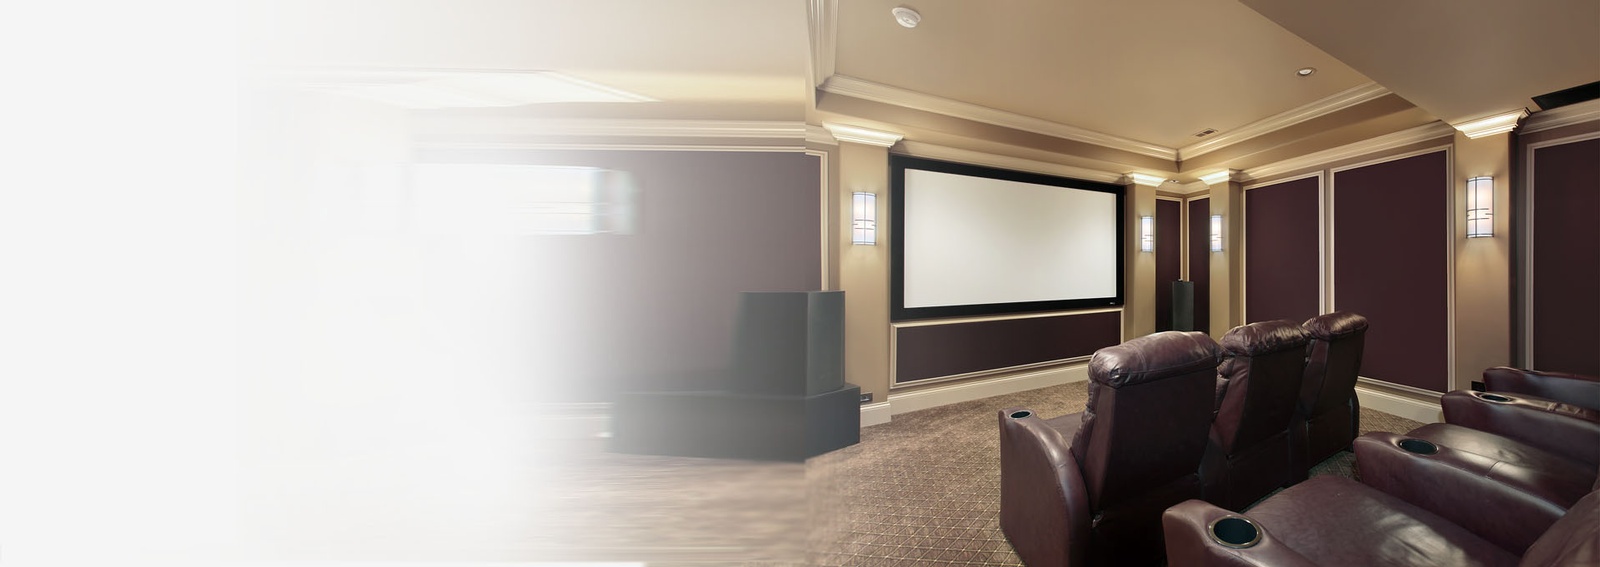 Canadian Home Theaters